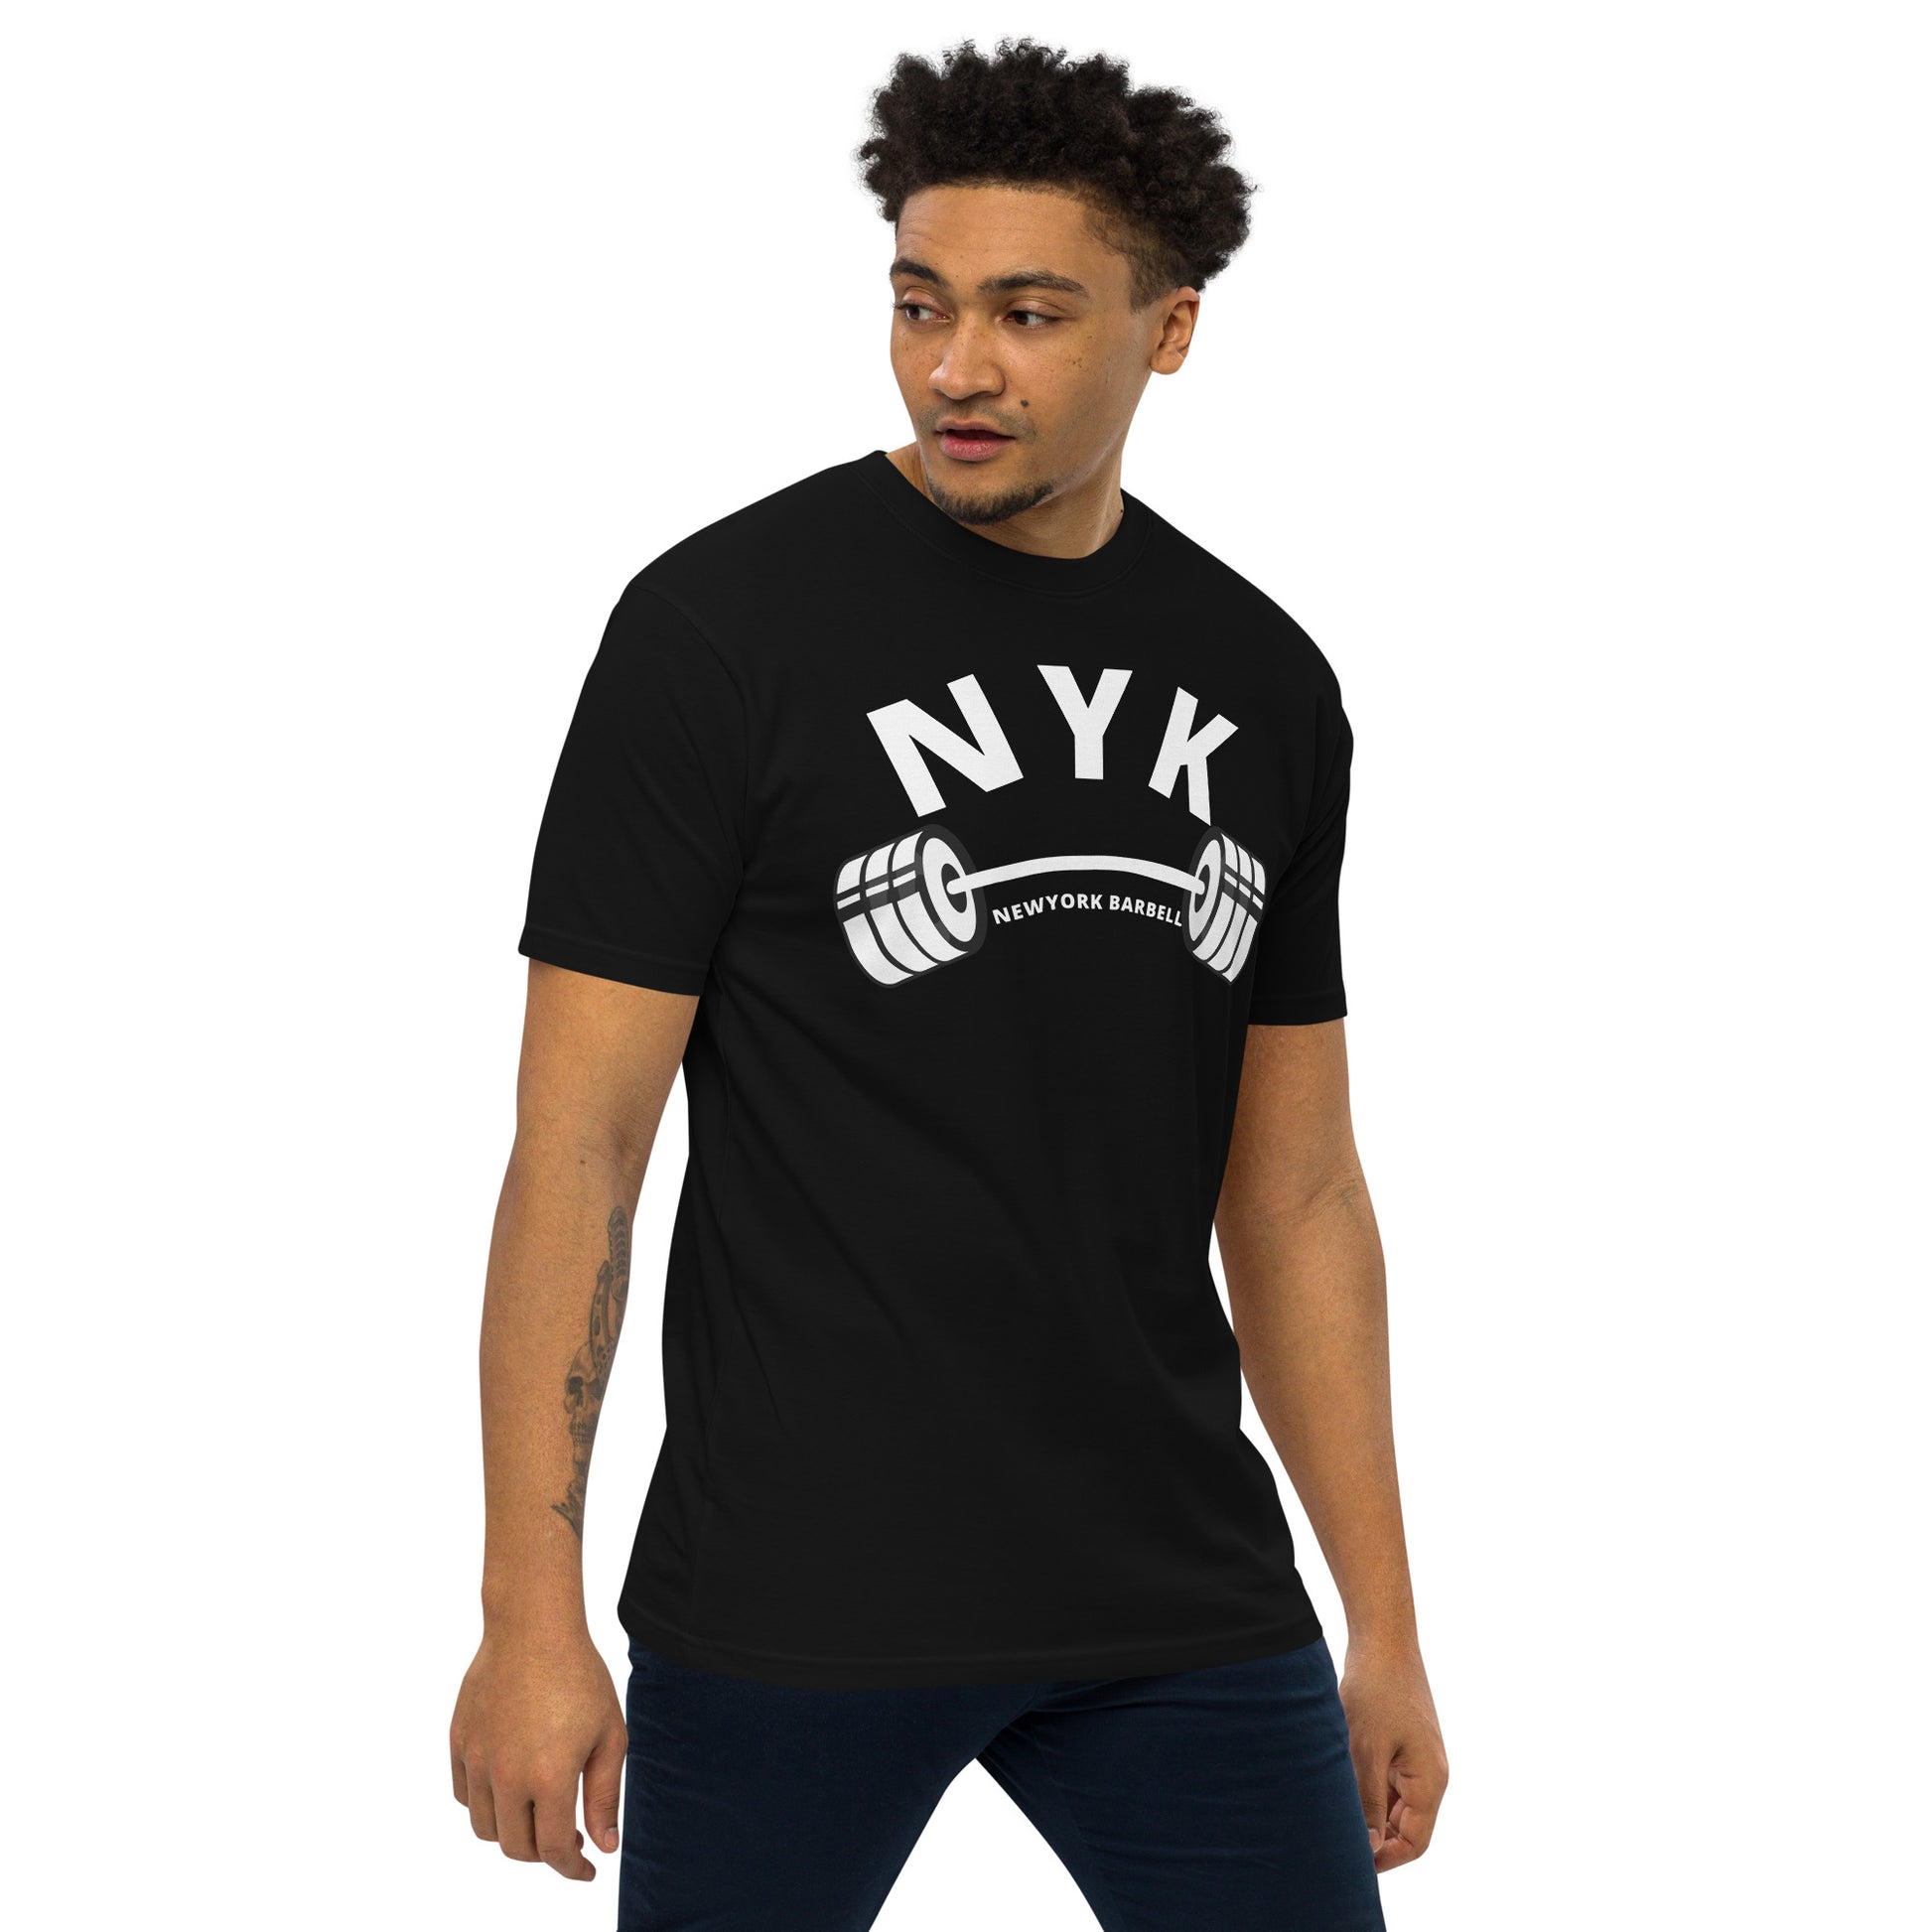 men tshirts - barbell - tees - graphic tees - newyork - gym - workout - online shopping